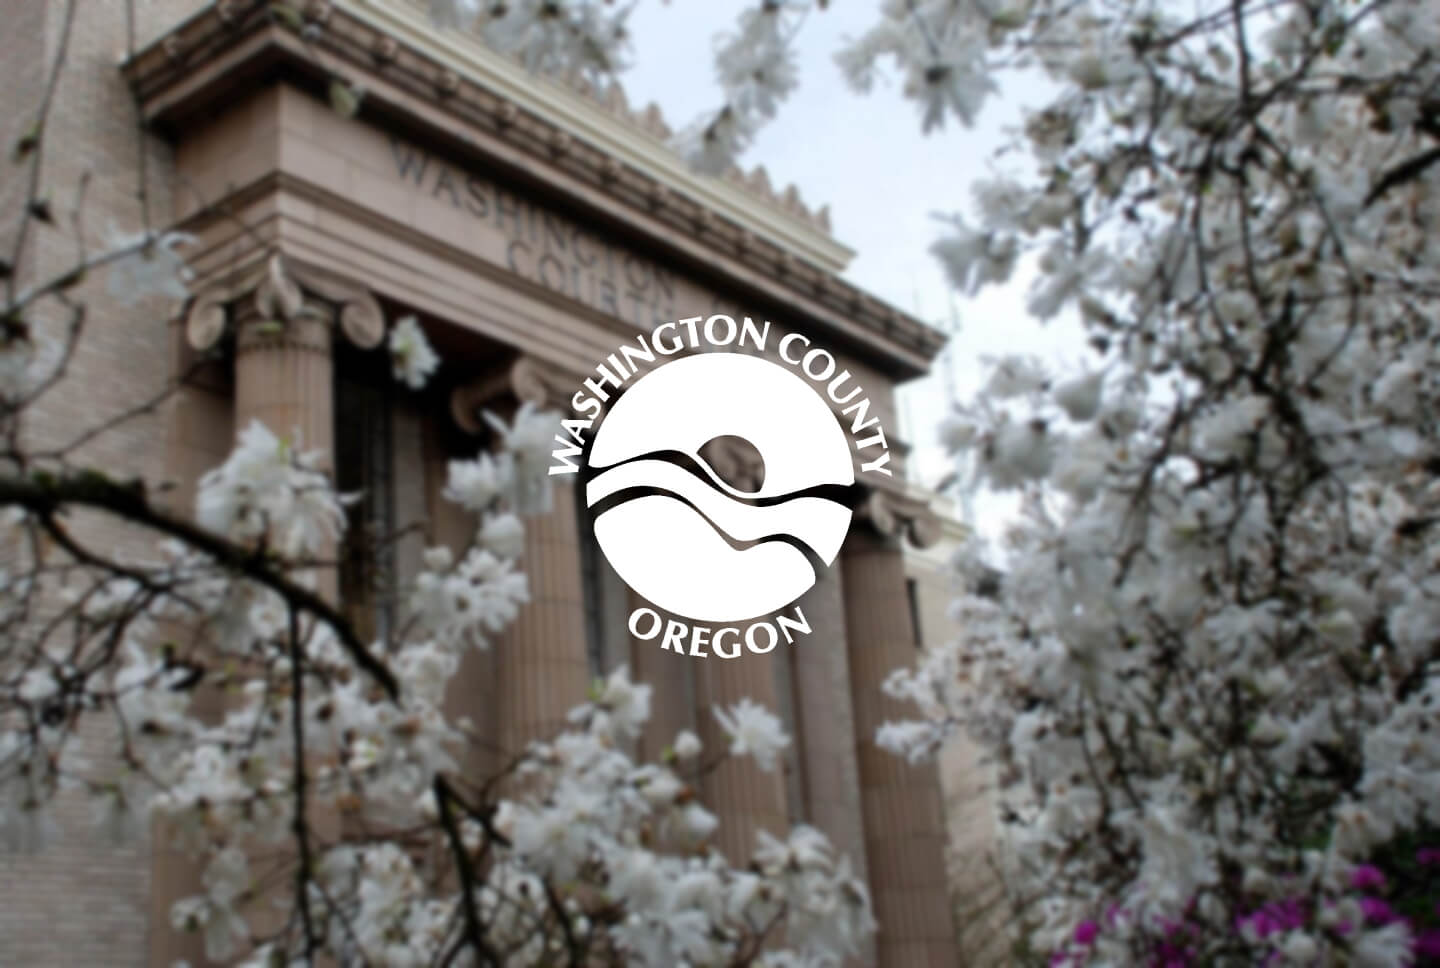 Zion Cloud Solutions has been awarded a significant contract by Washington County, Oregon!